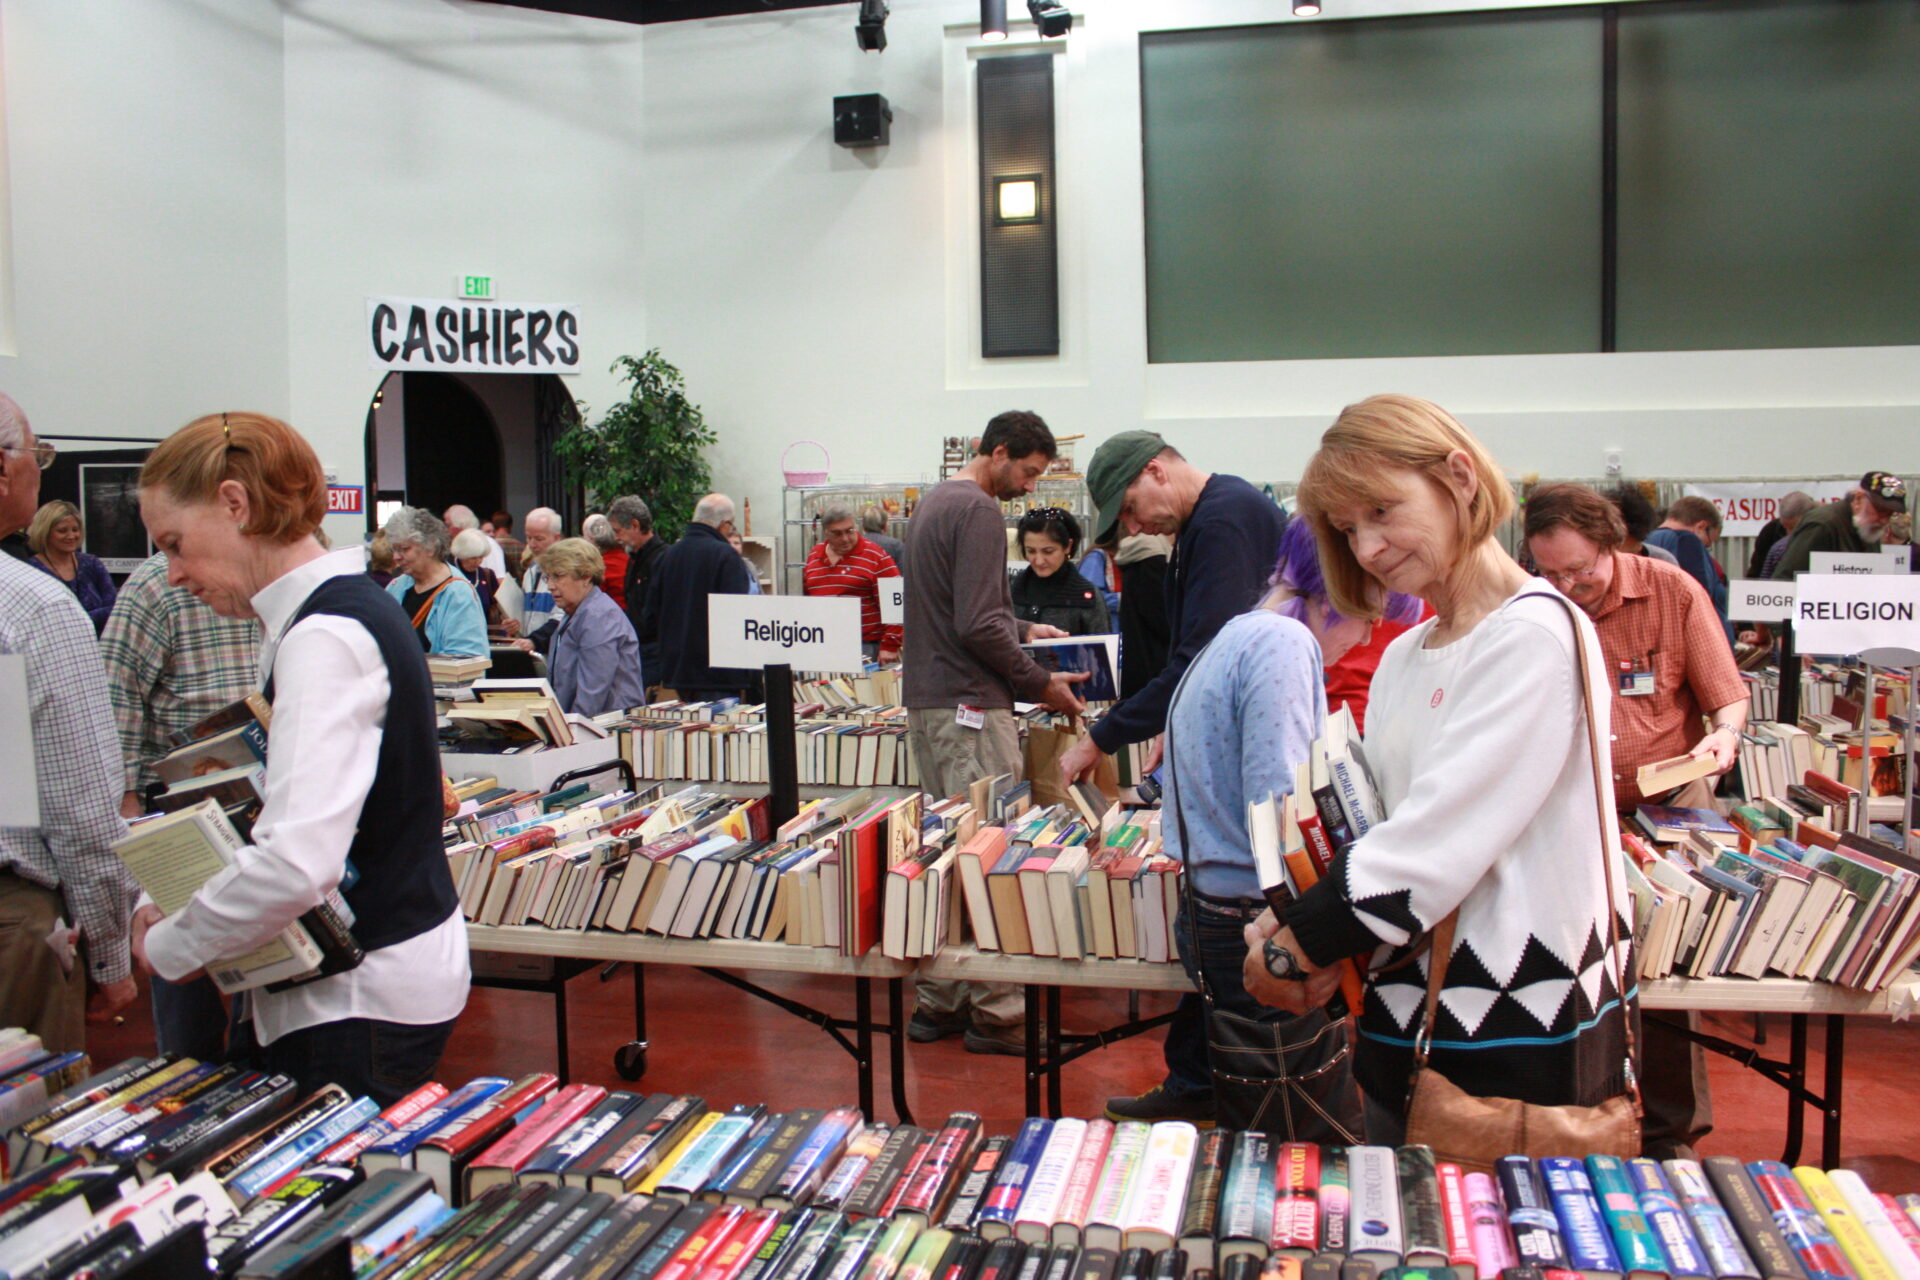 A group of people at a book sale.